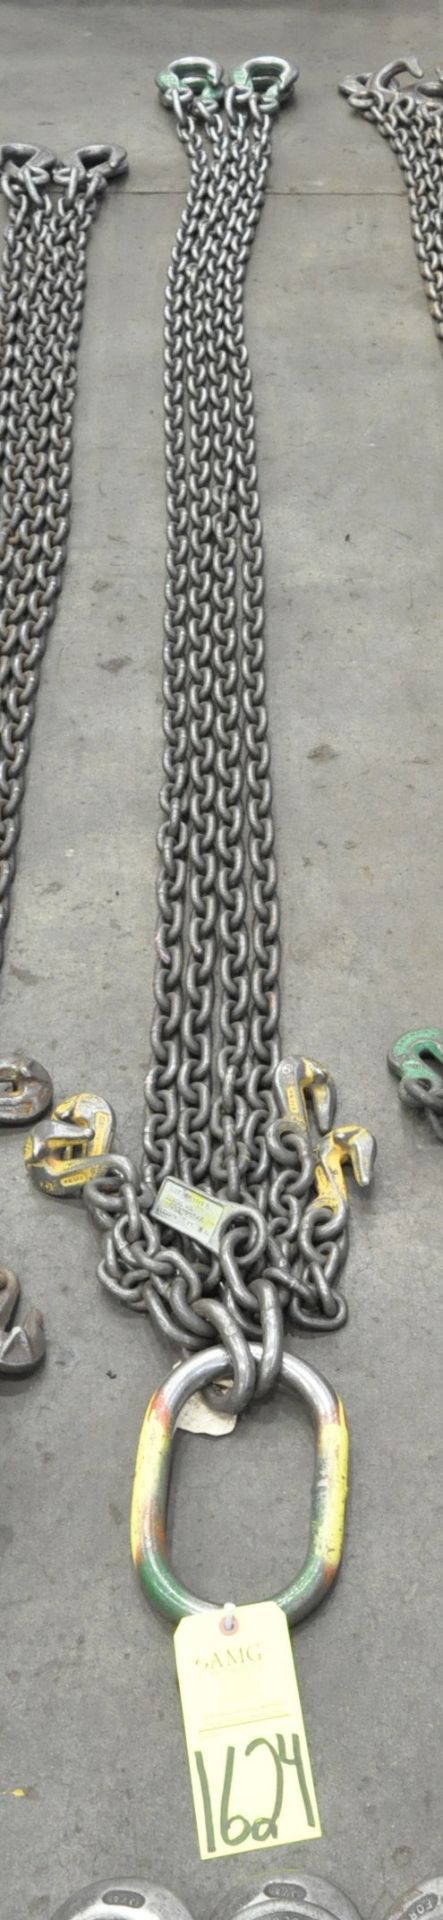 3/8" Link x 9' Long 4-Hook Chain Sling with (4) Chokers, Cert Tag, (G-23), (Yellow Tag)